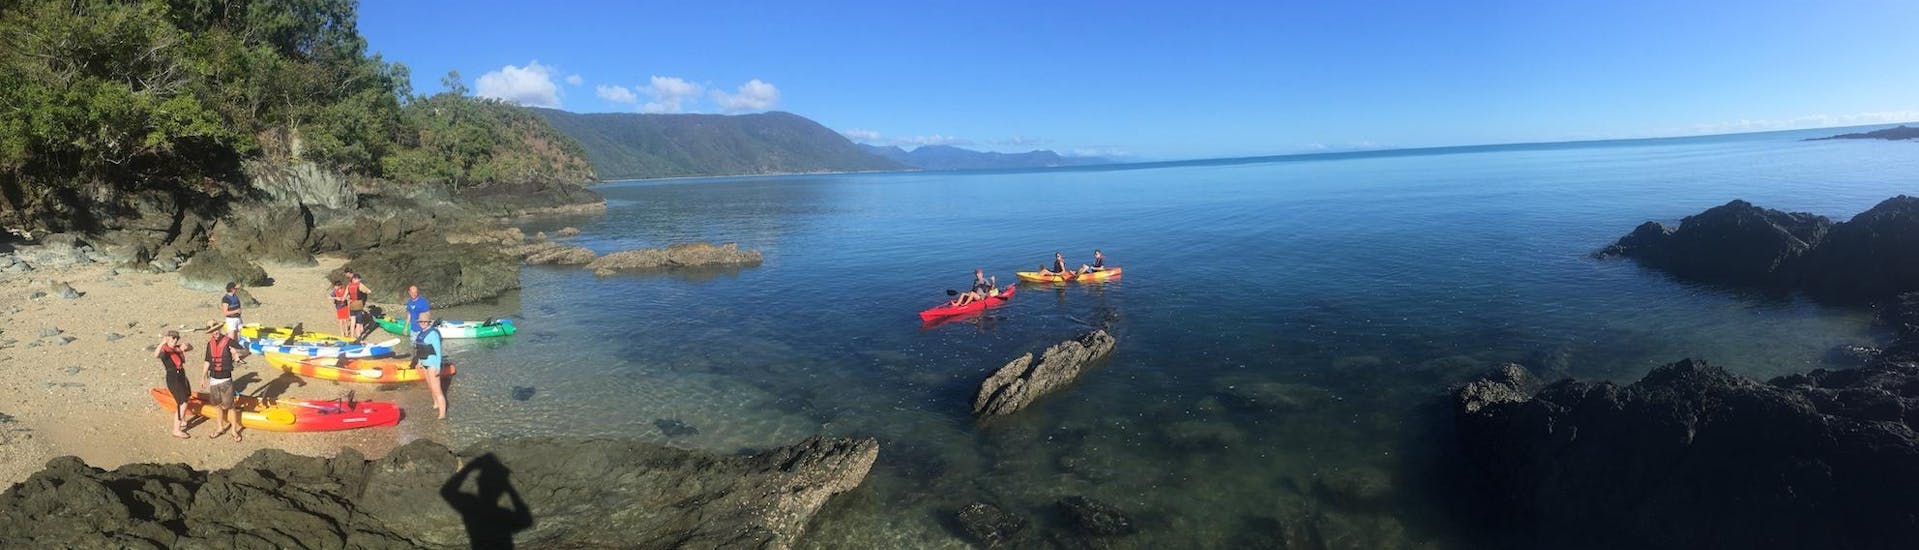 rainforest-stand-up-paddle-boarding-in-cairns-pacific-watersports